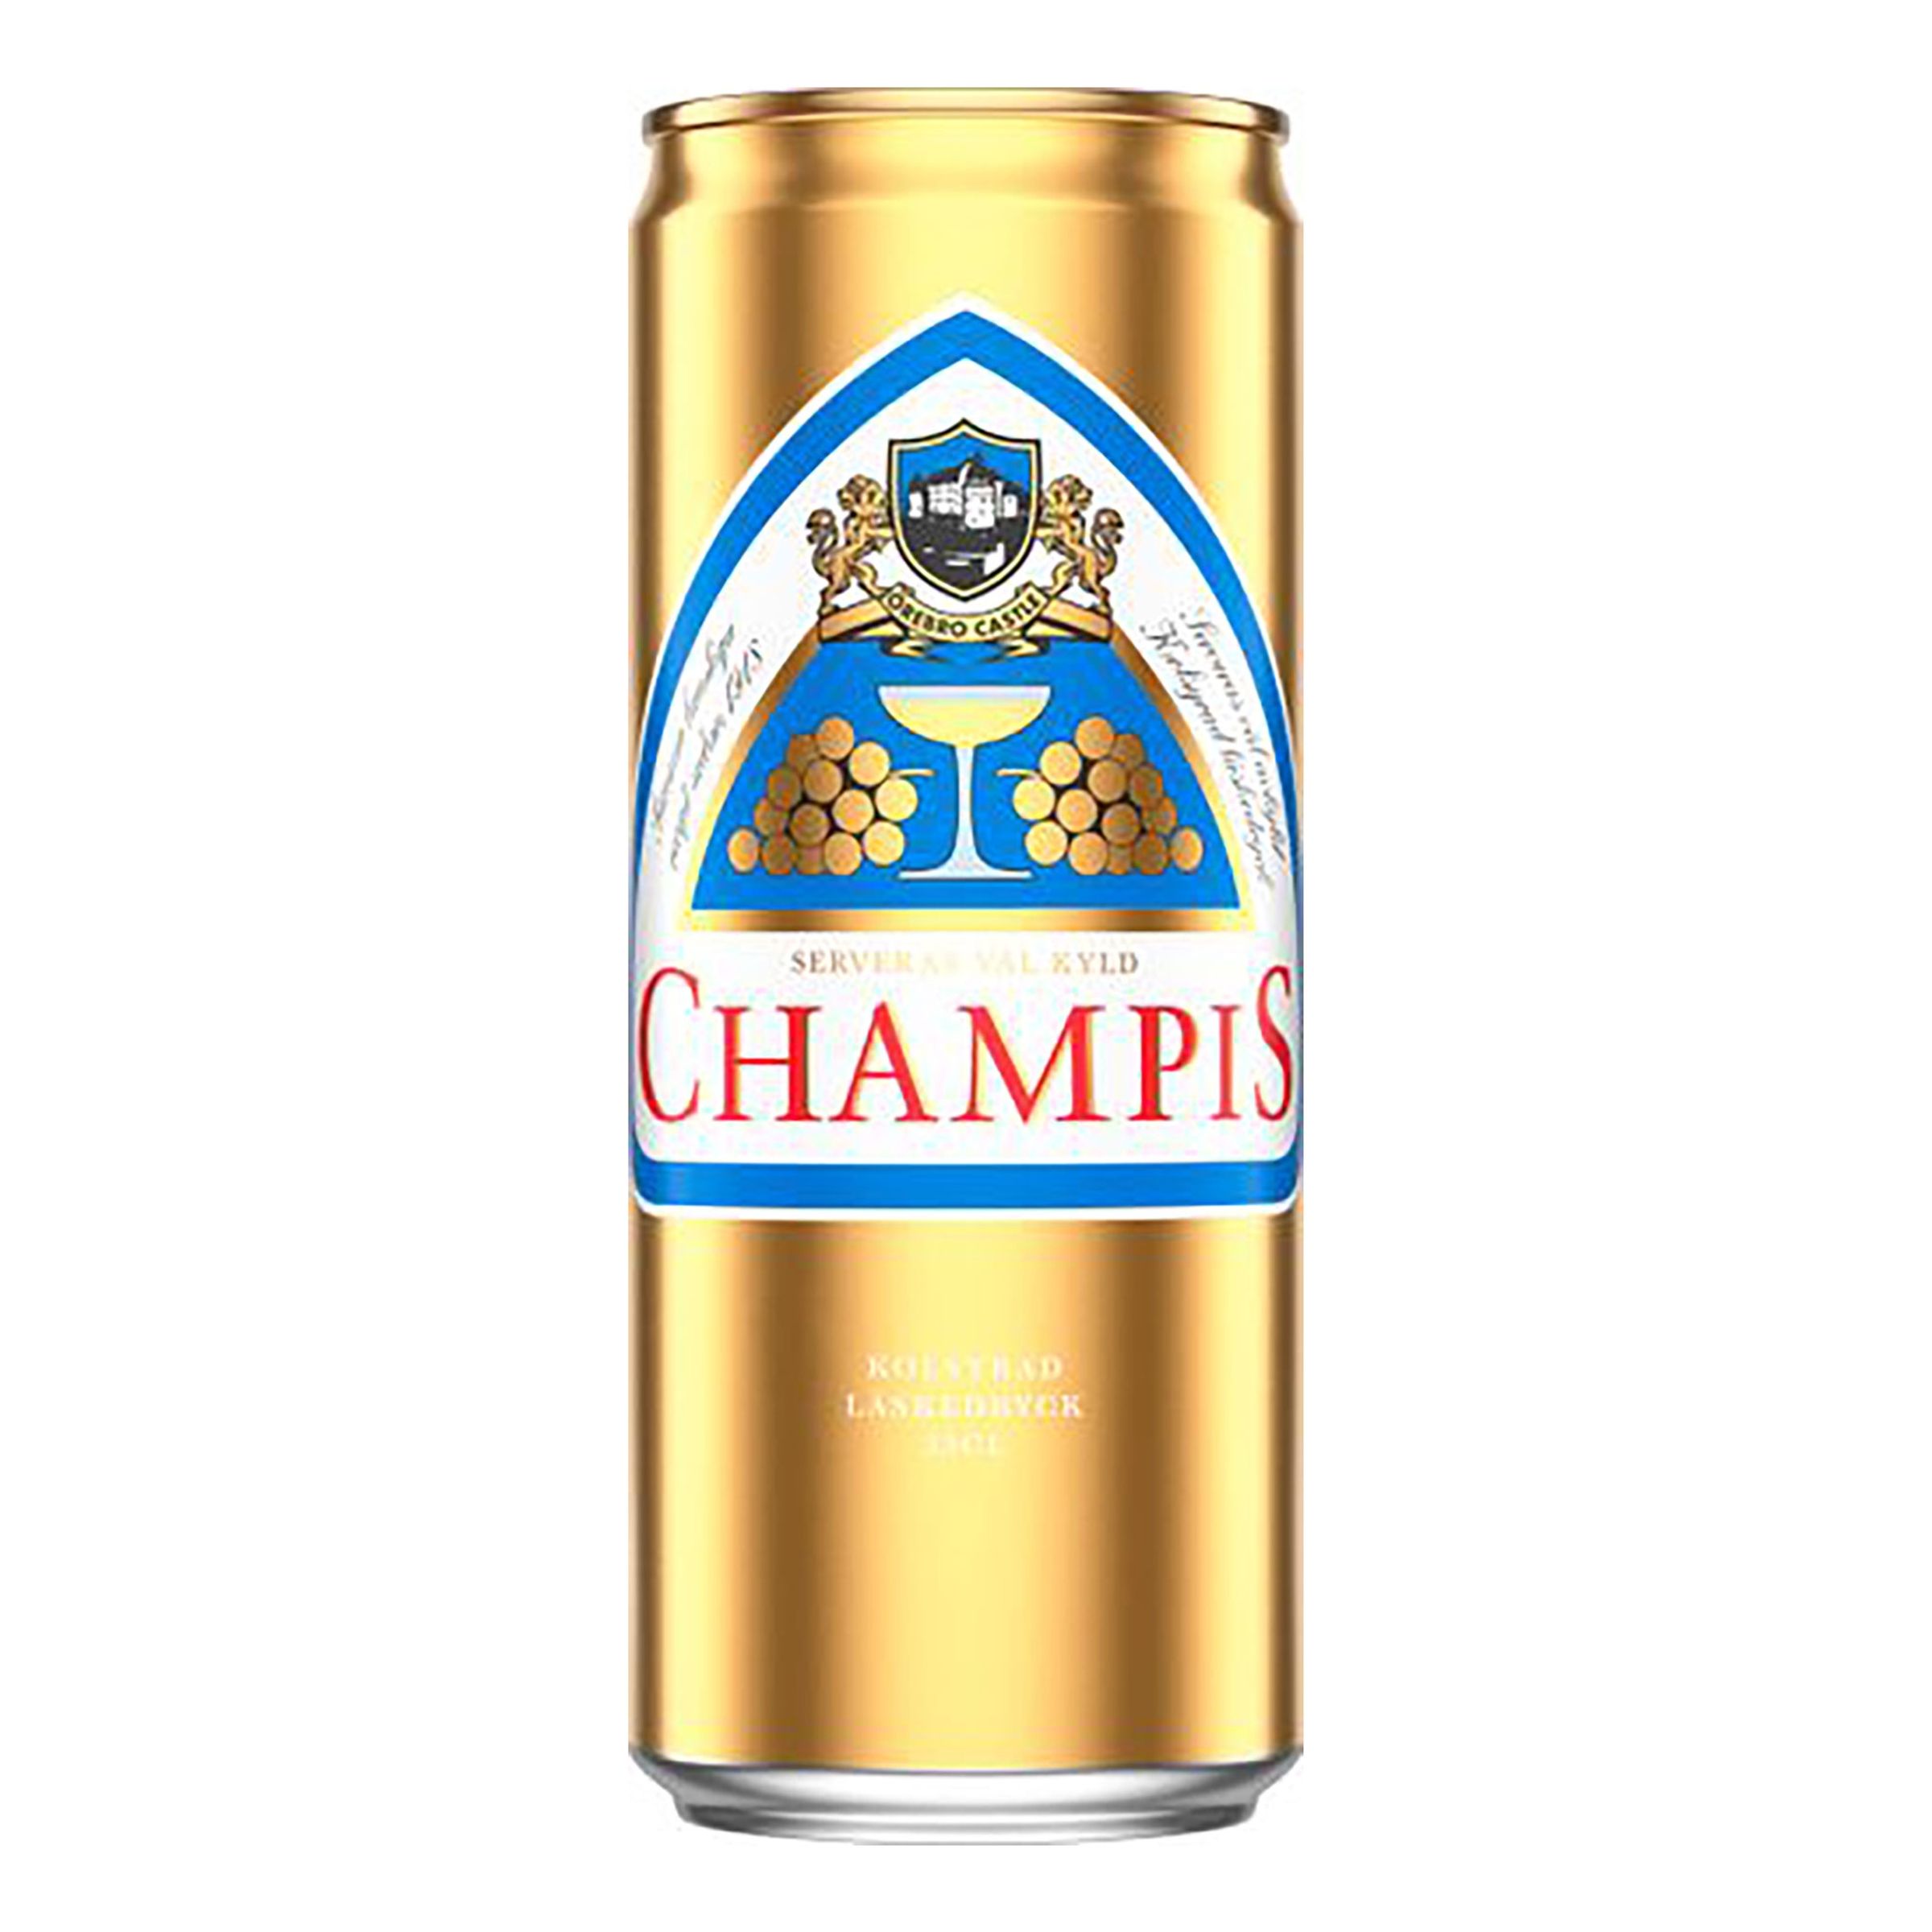 Champis - 33 cl